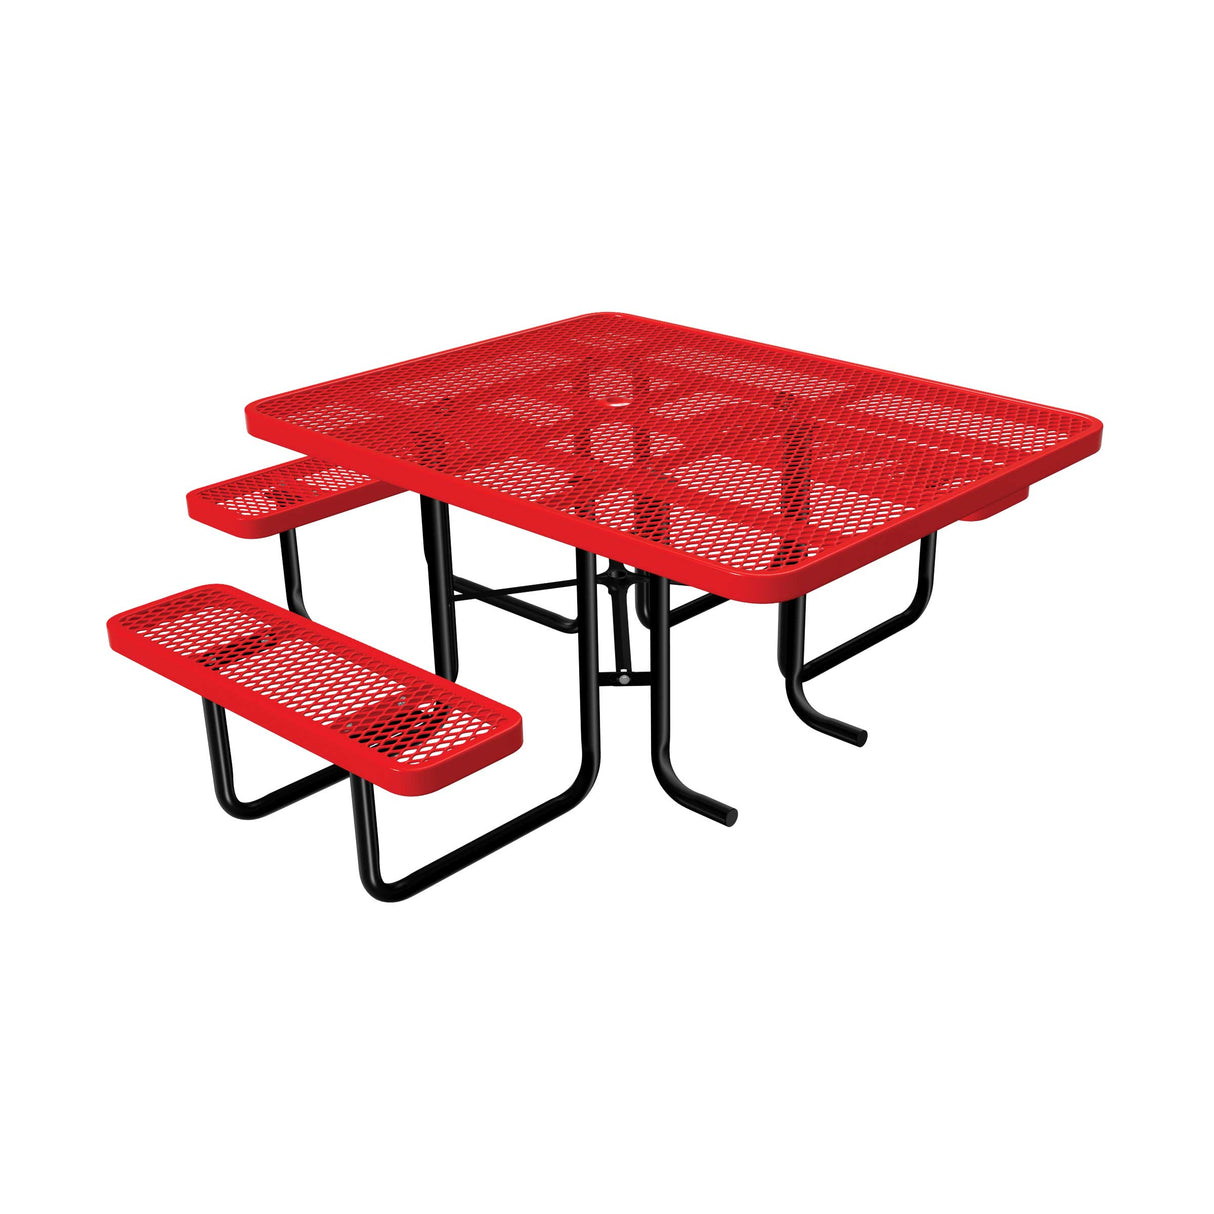 46˝ x 58˝ Expanded Metal ADA Table